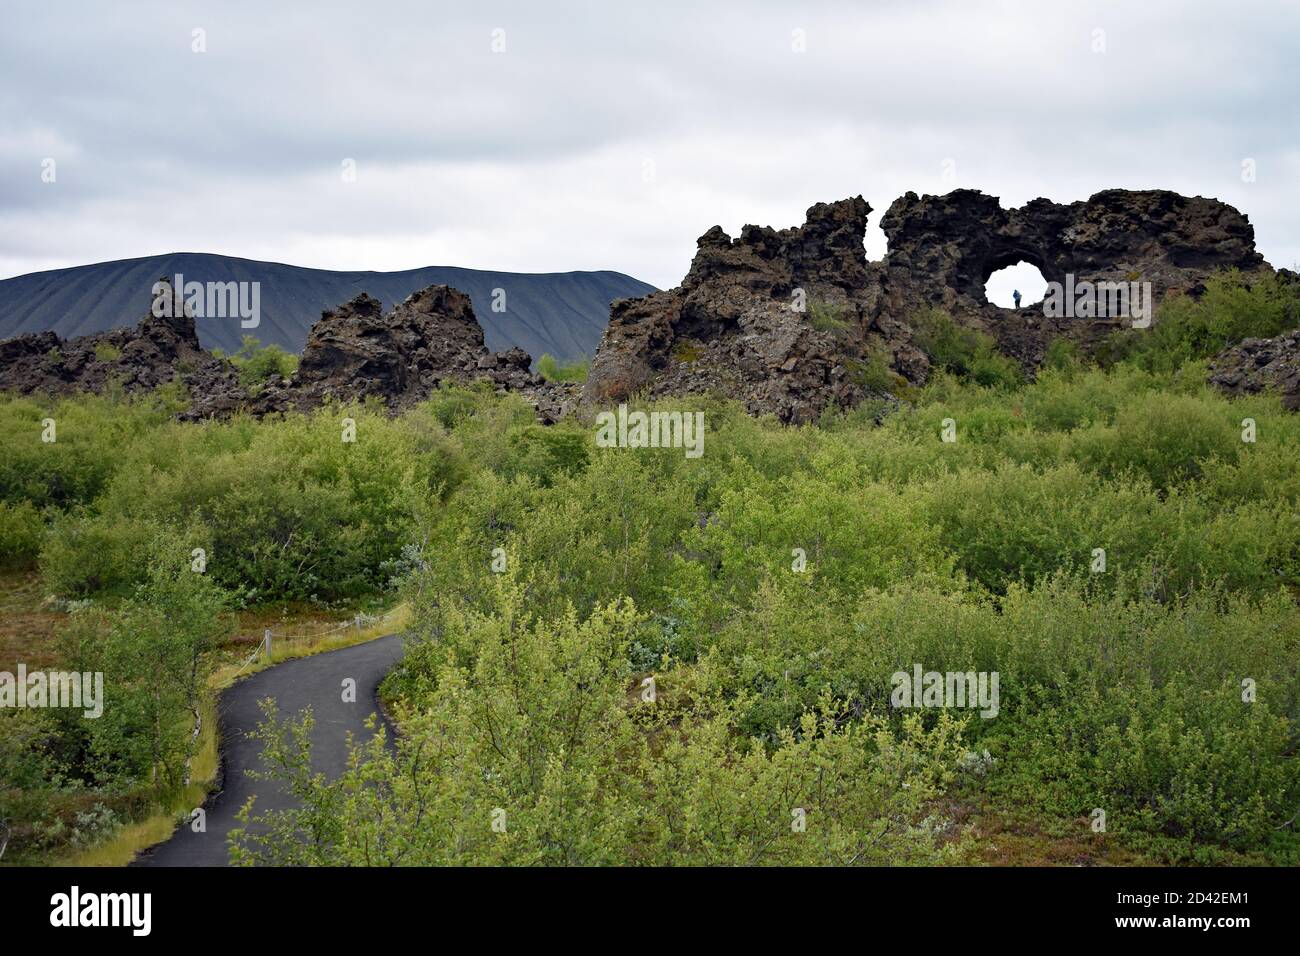 The lava field at Dimmuborgir in Lake Myvatn, North Iceland. A pedestrian path through the trees. A lava window with a visitor inside. Hverfell behind. Stock Photo